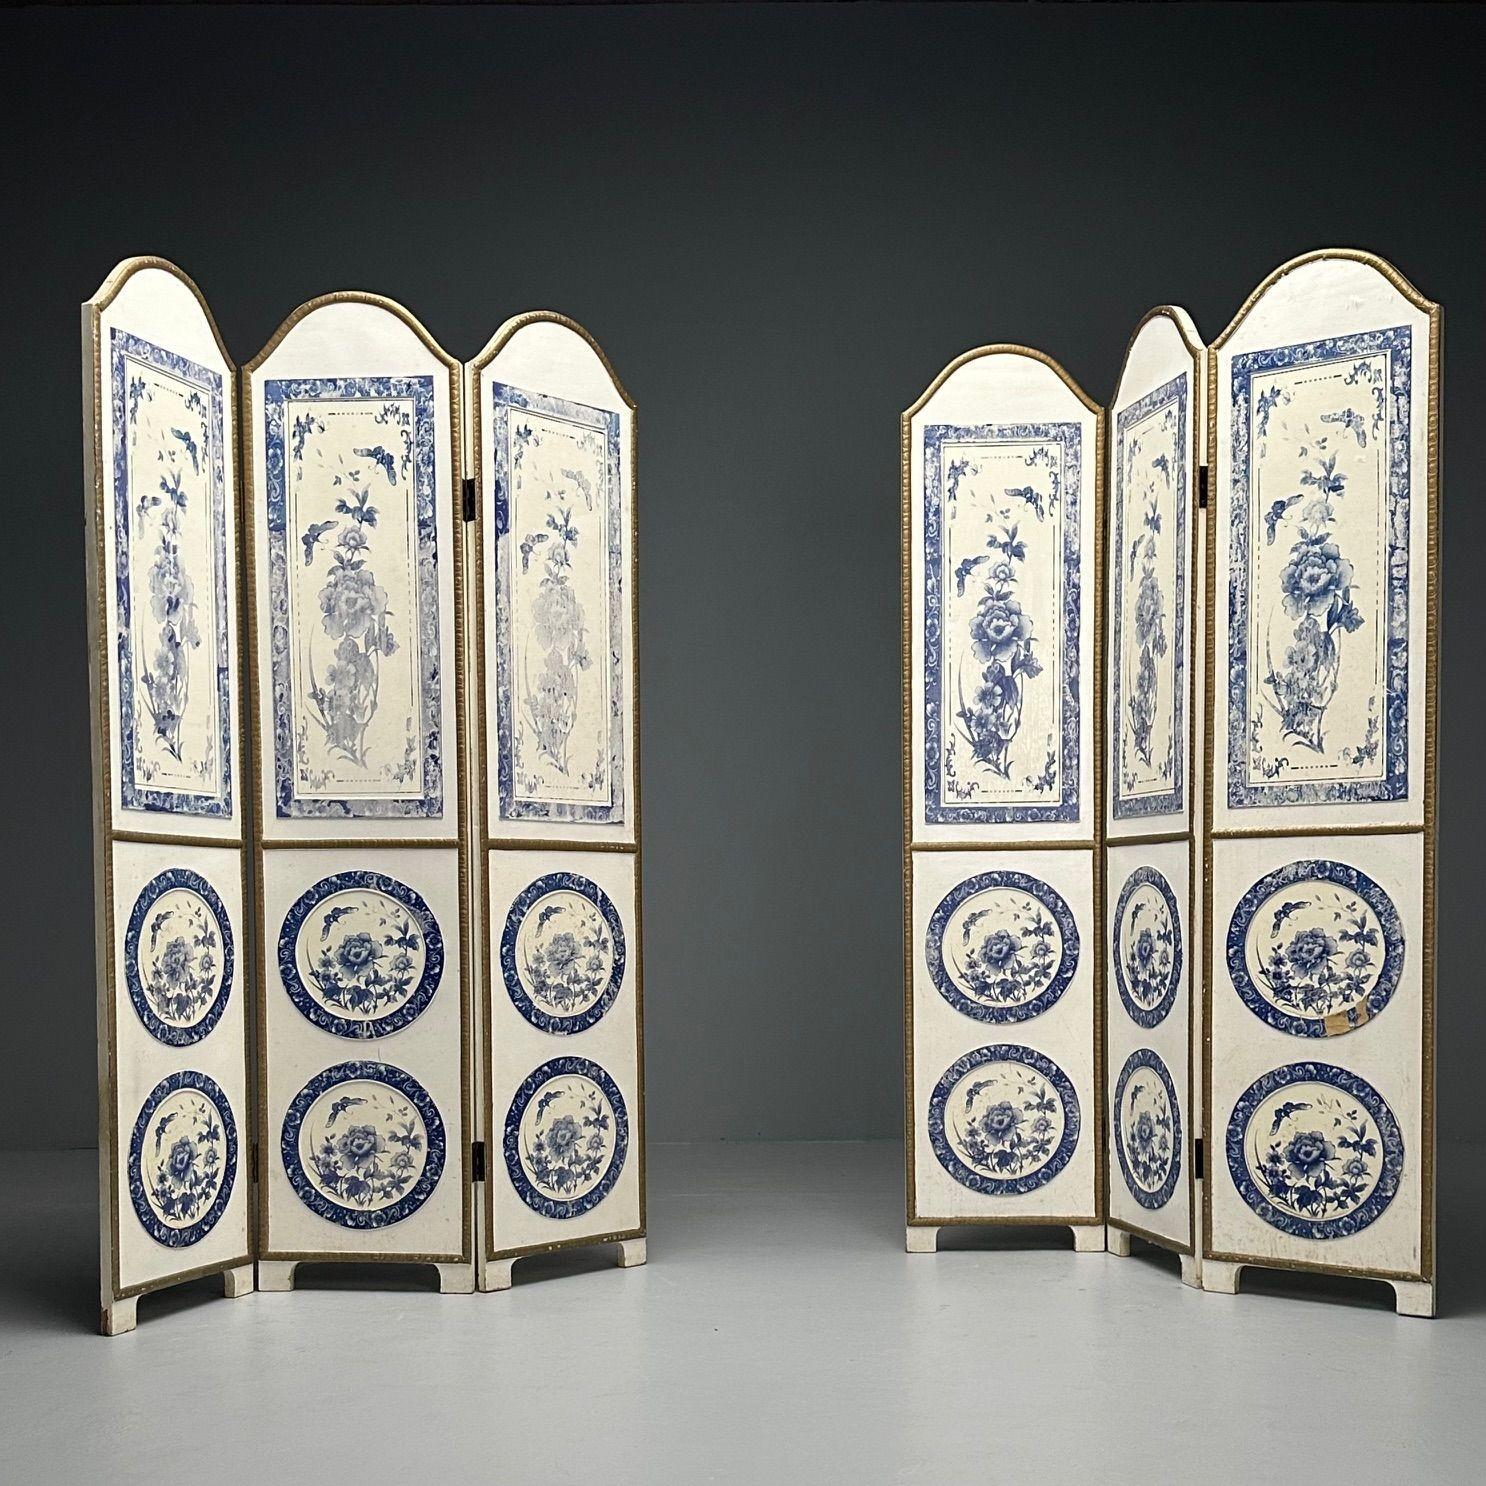 Italian, Chinoiserie, Pair of Room Dividers or Screens, Blue and White, Floral Motif, Gilt

Each having a Chinoiserie style depicting tapestry flow blue decorations above large platter flow blue bottom panels. The panels on bracket feet flanked in